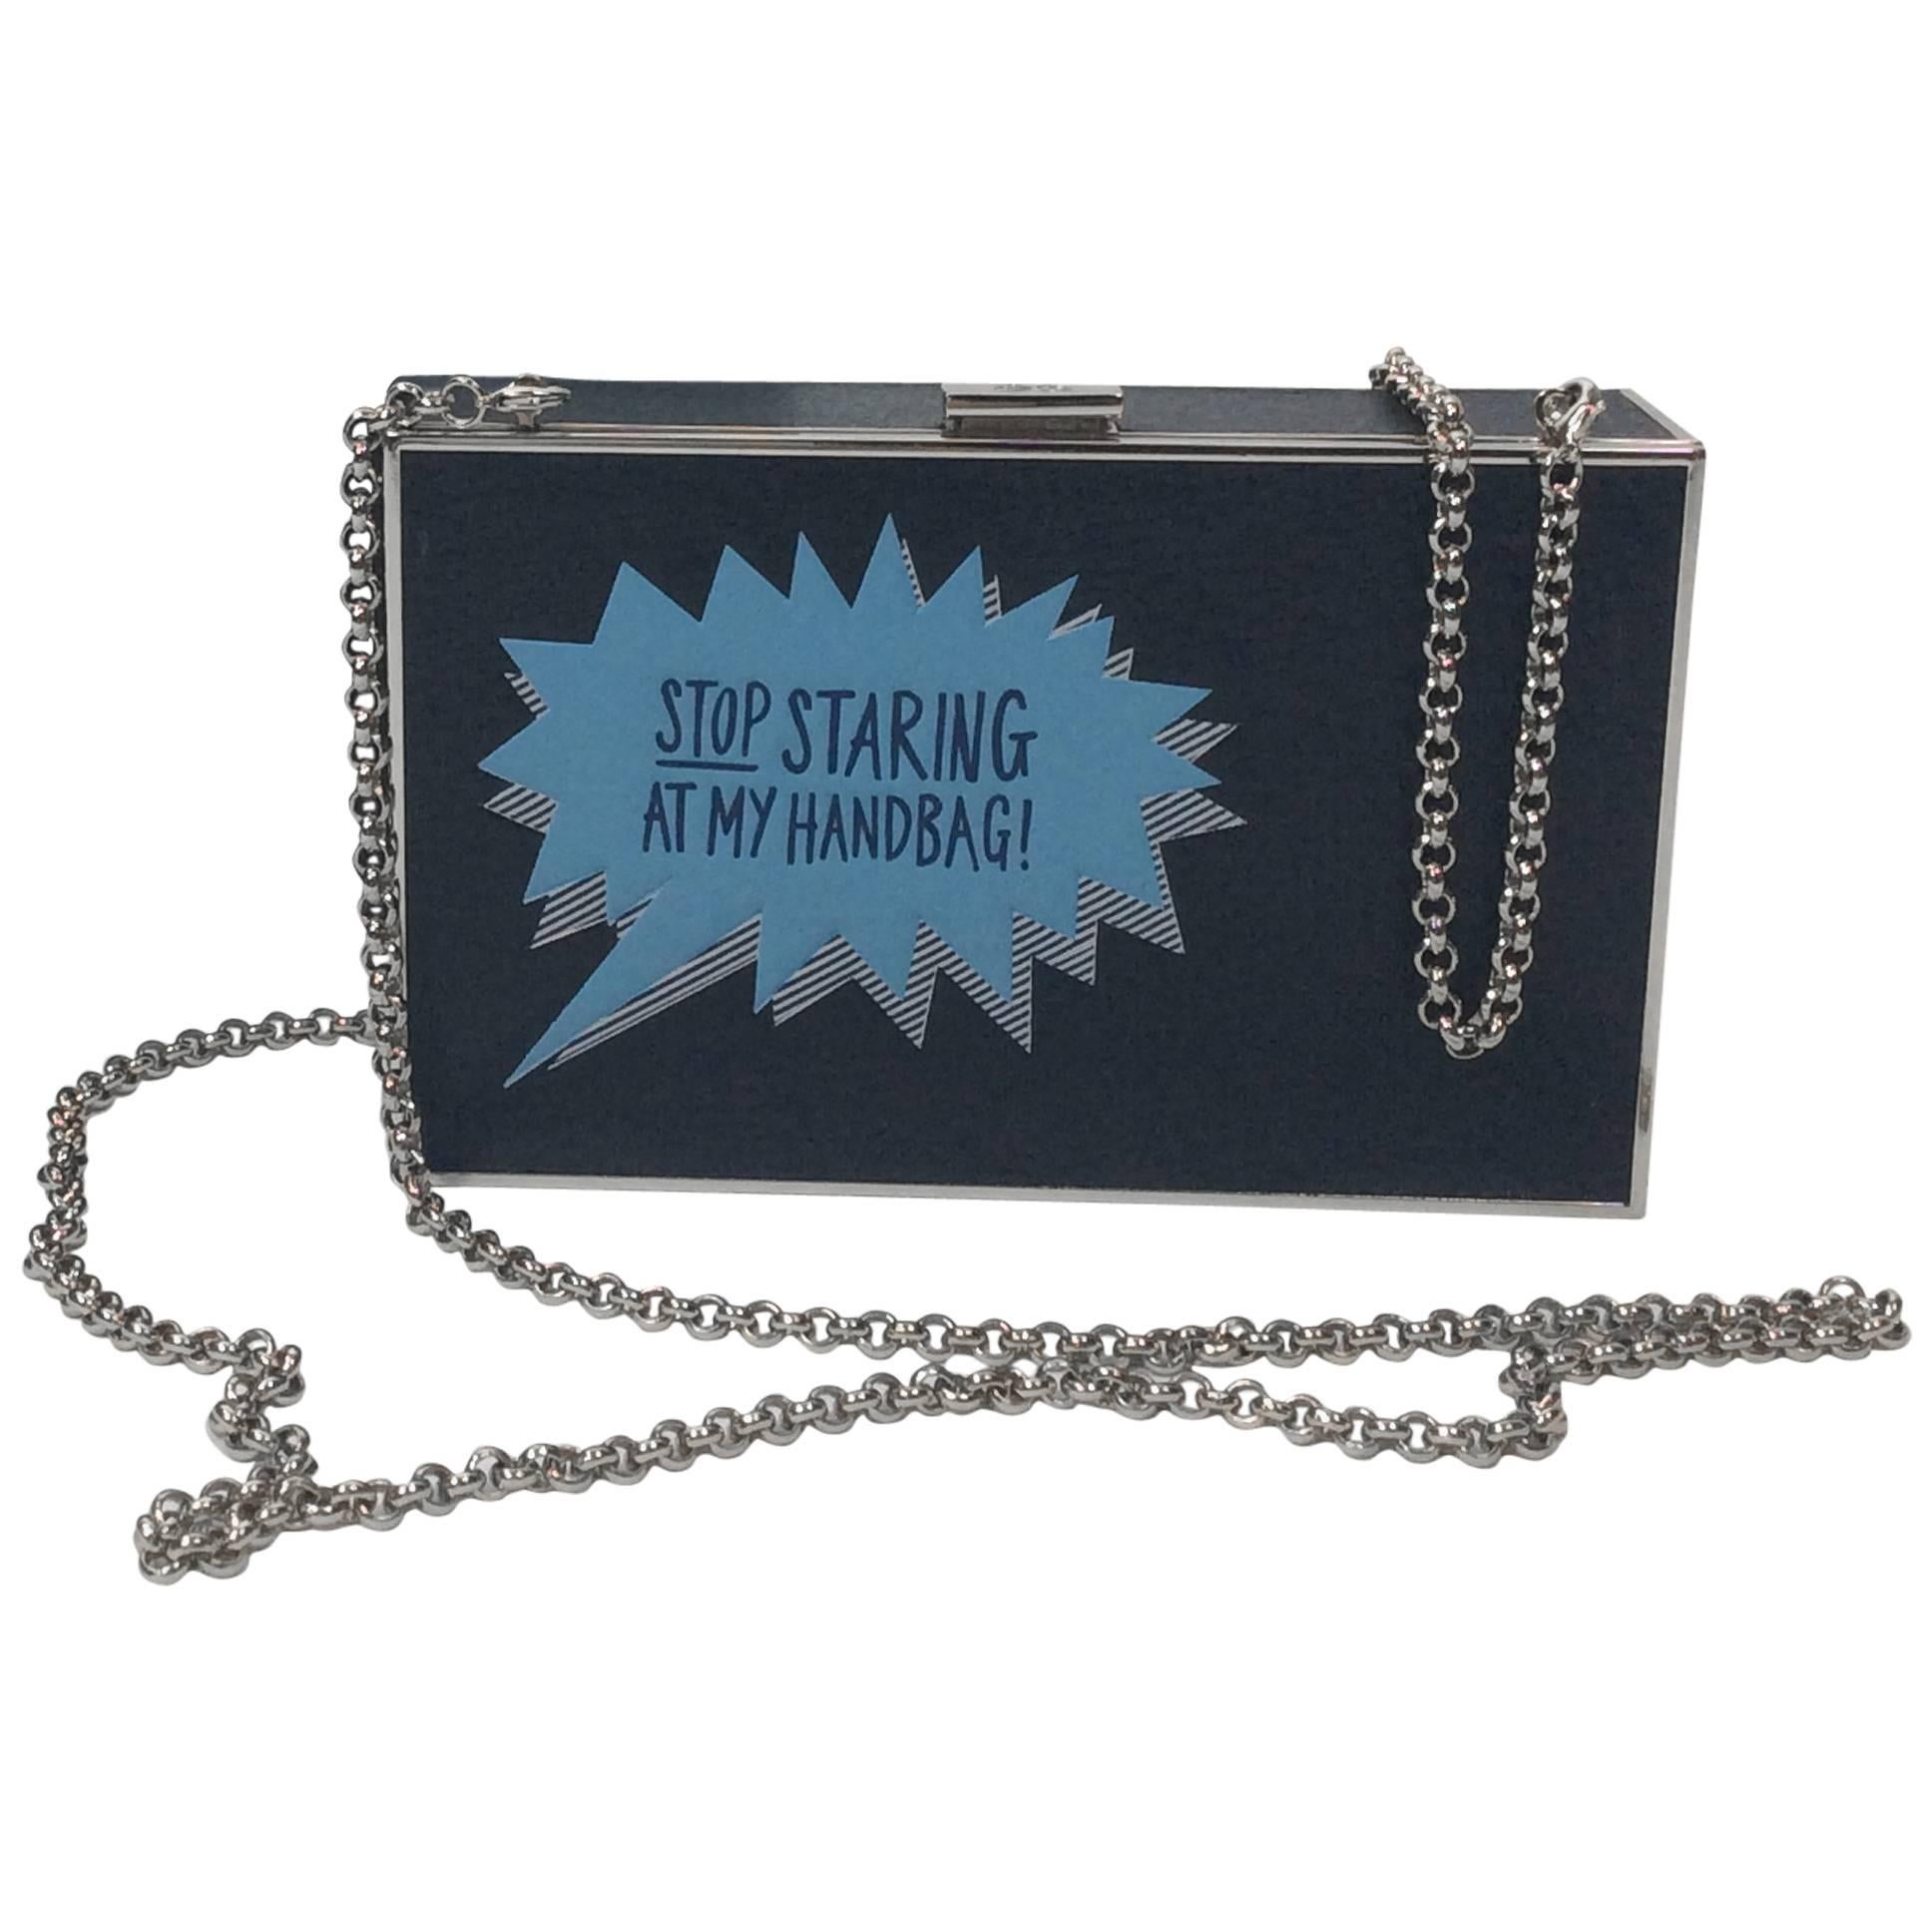 Anya Hindmarch Stop Staring at My Handbag Evening Clutch For Sale